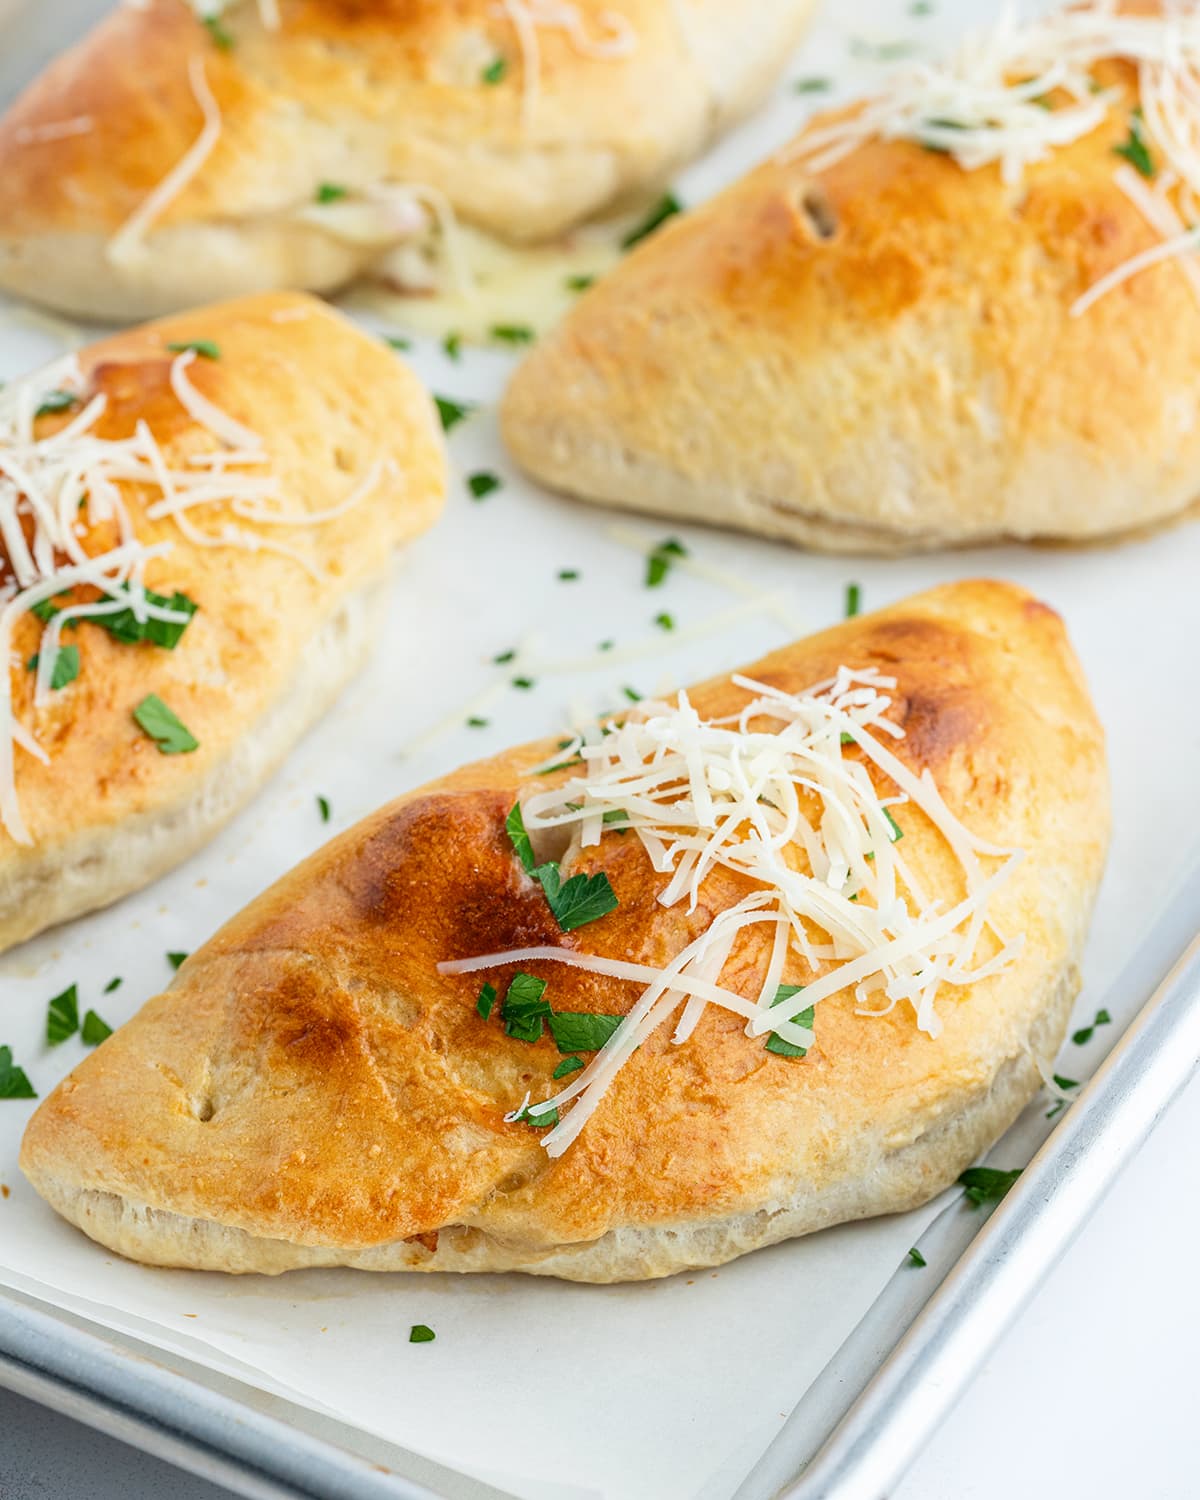 A golden brown calzone on a baking sheet topped with parsley and shredded parmesan.